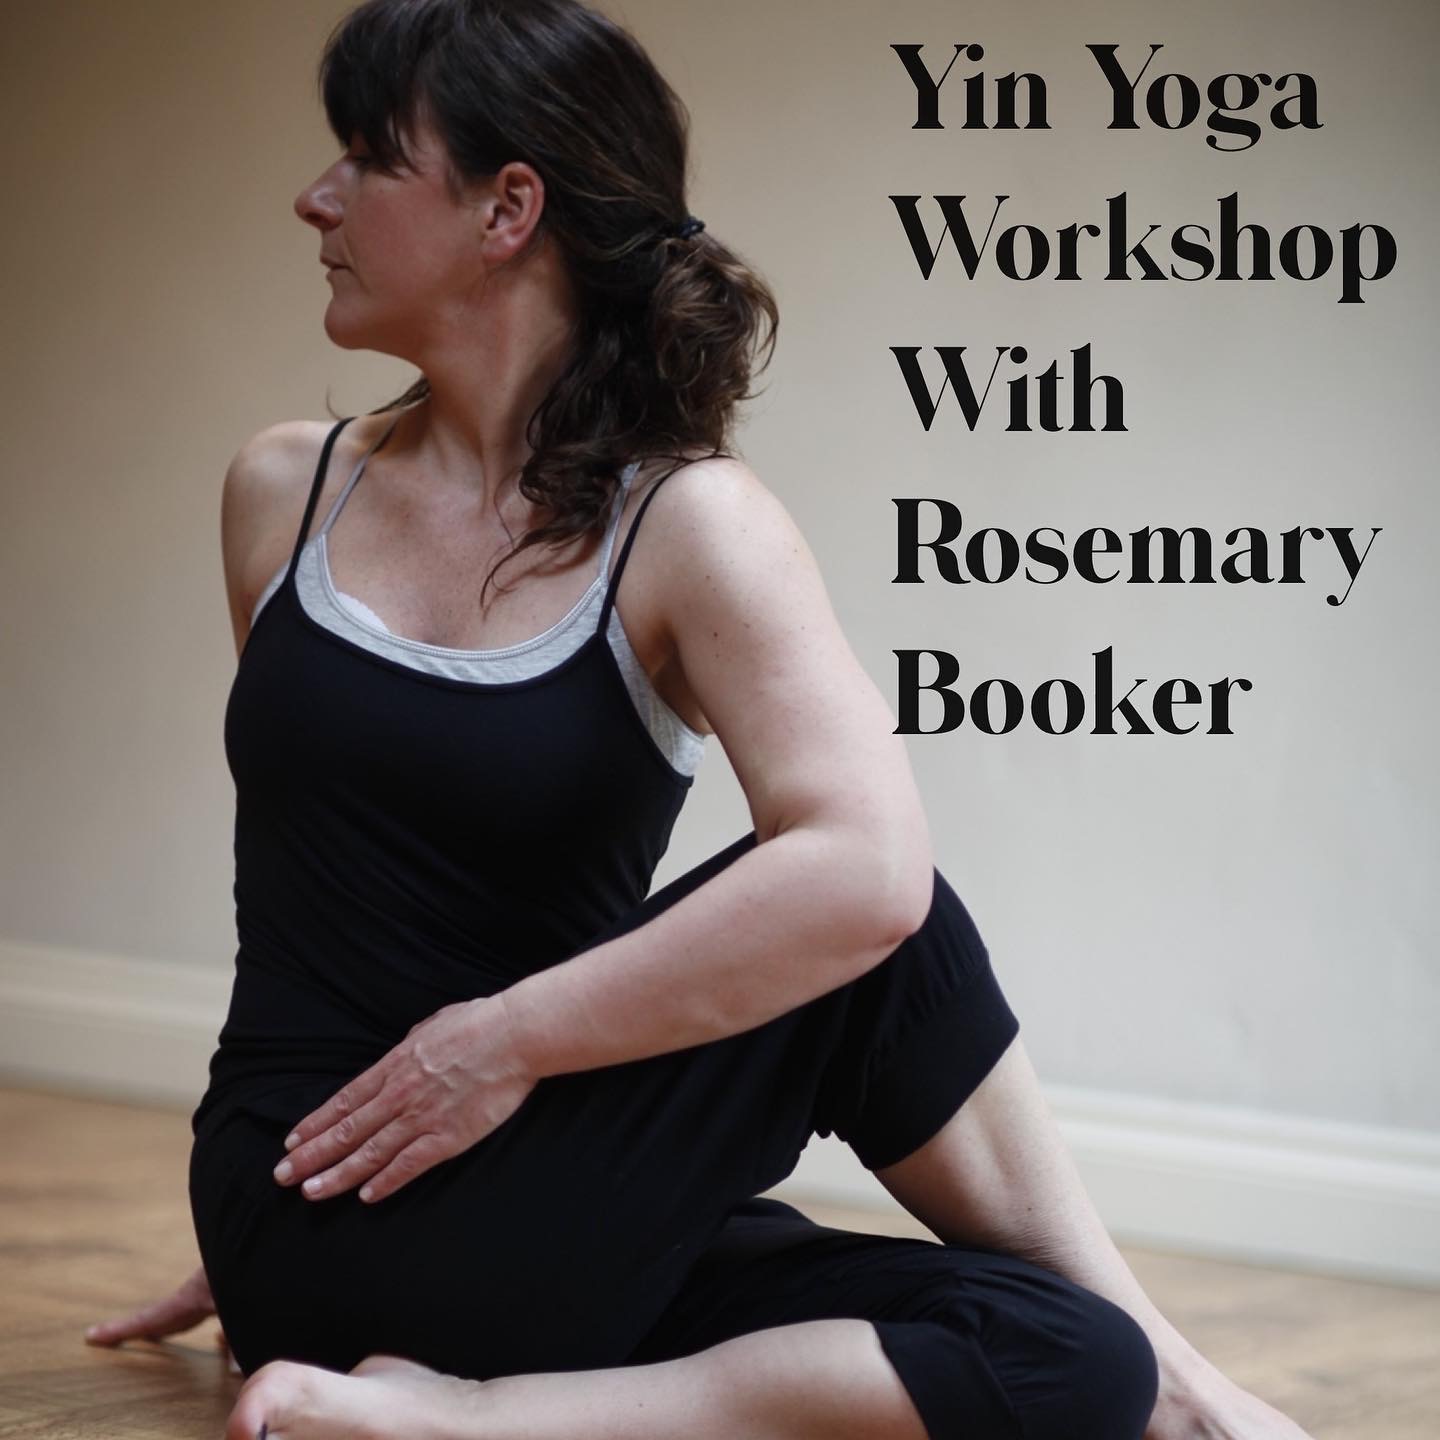 YIN YOGA WORKSHOP - Nourish your overworked digestive system with Rosemary Booker -  Price £25 